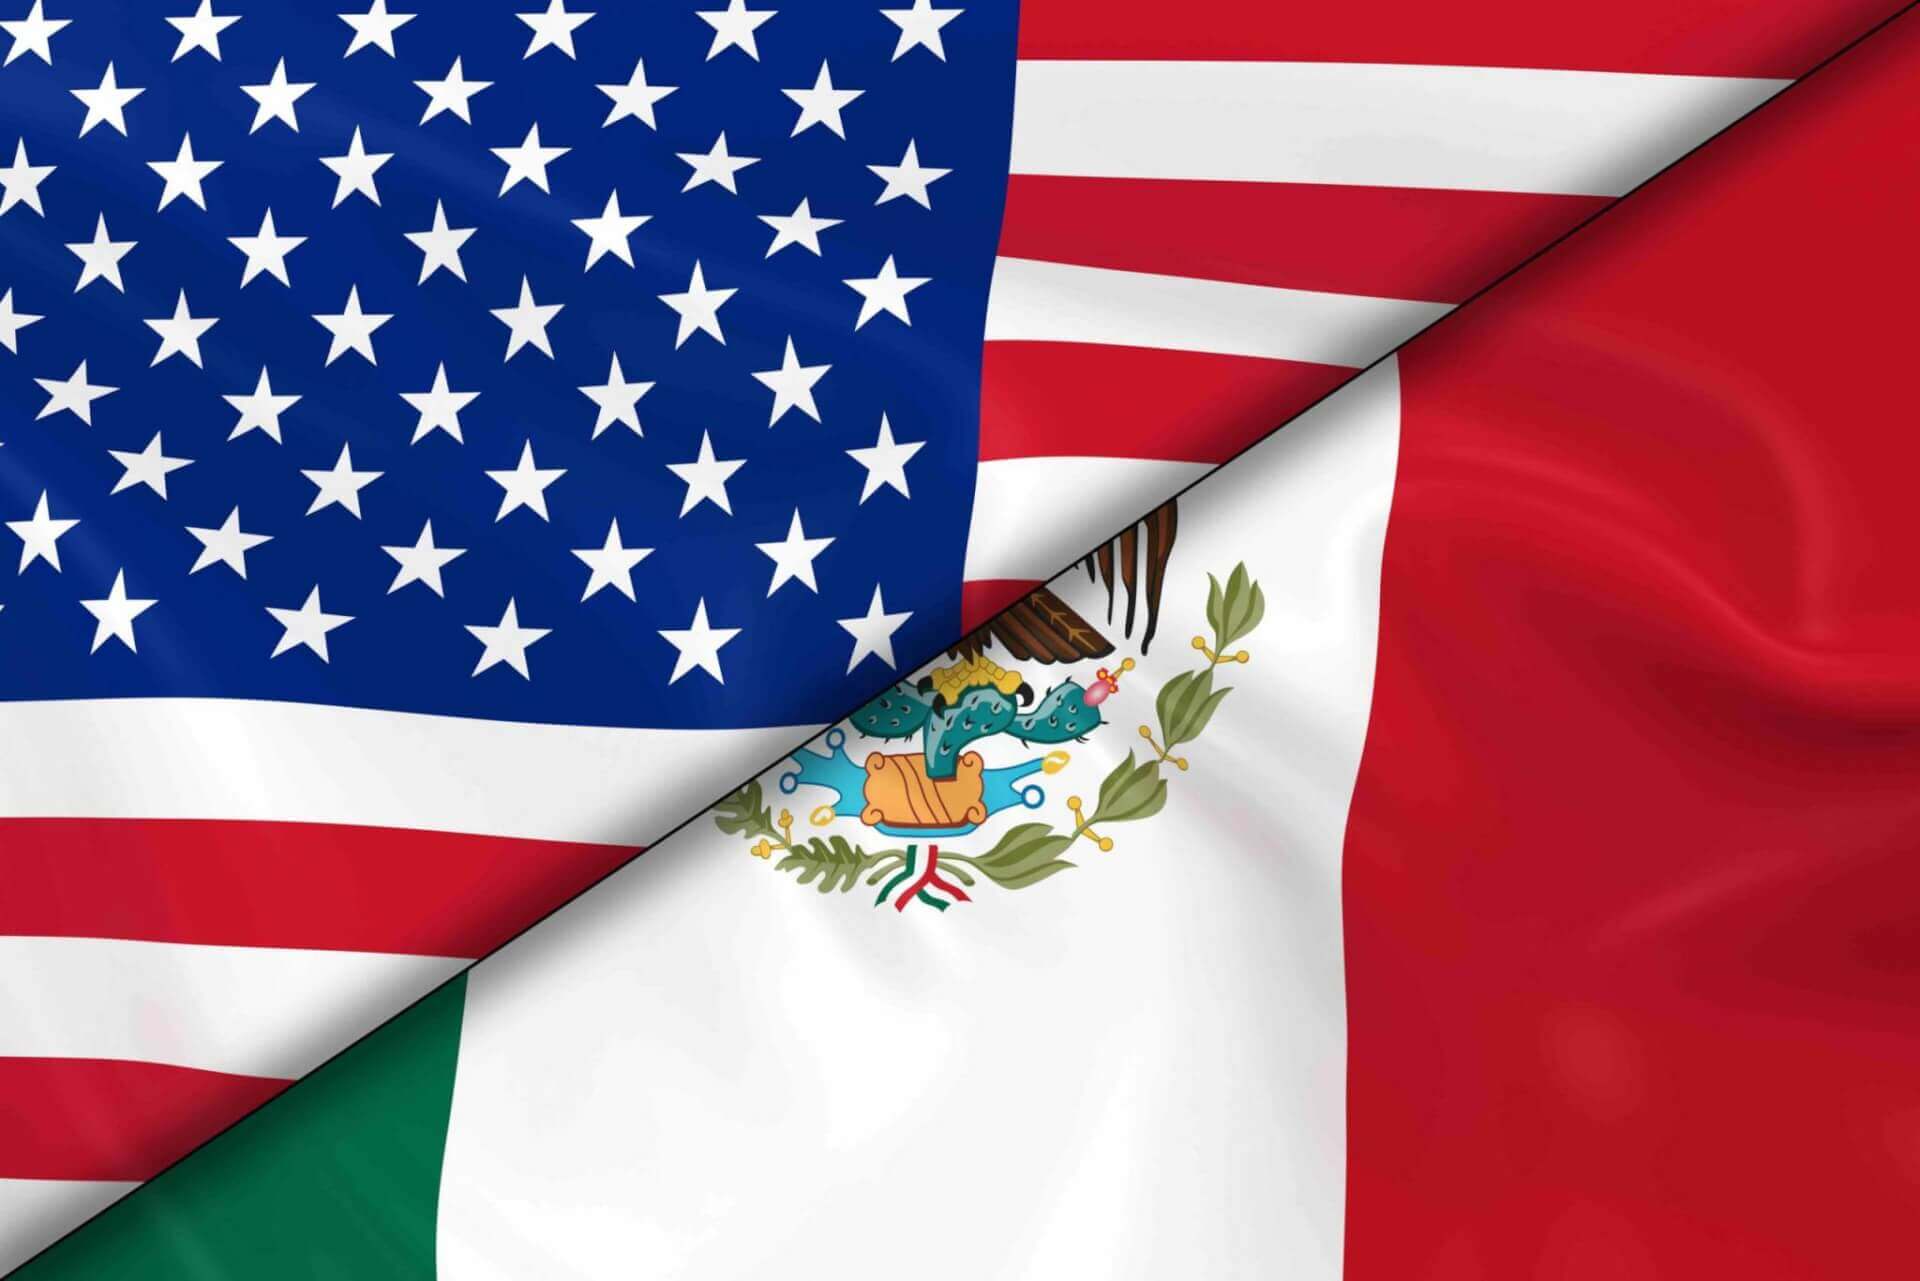 Joint Declaration Between the United States and Mexico (July 8, 2020)